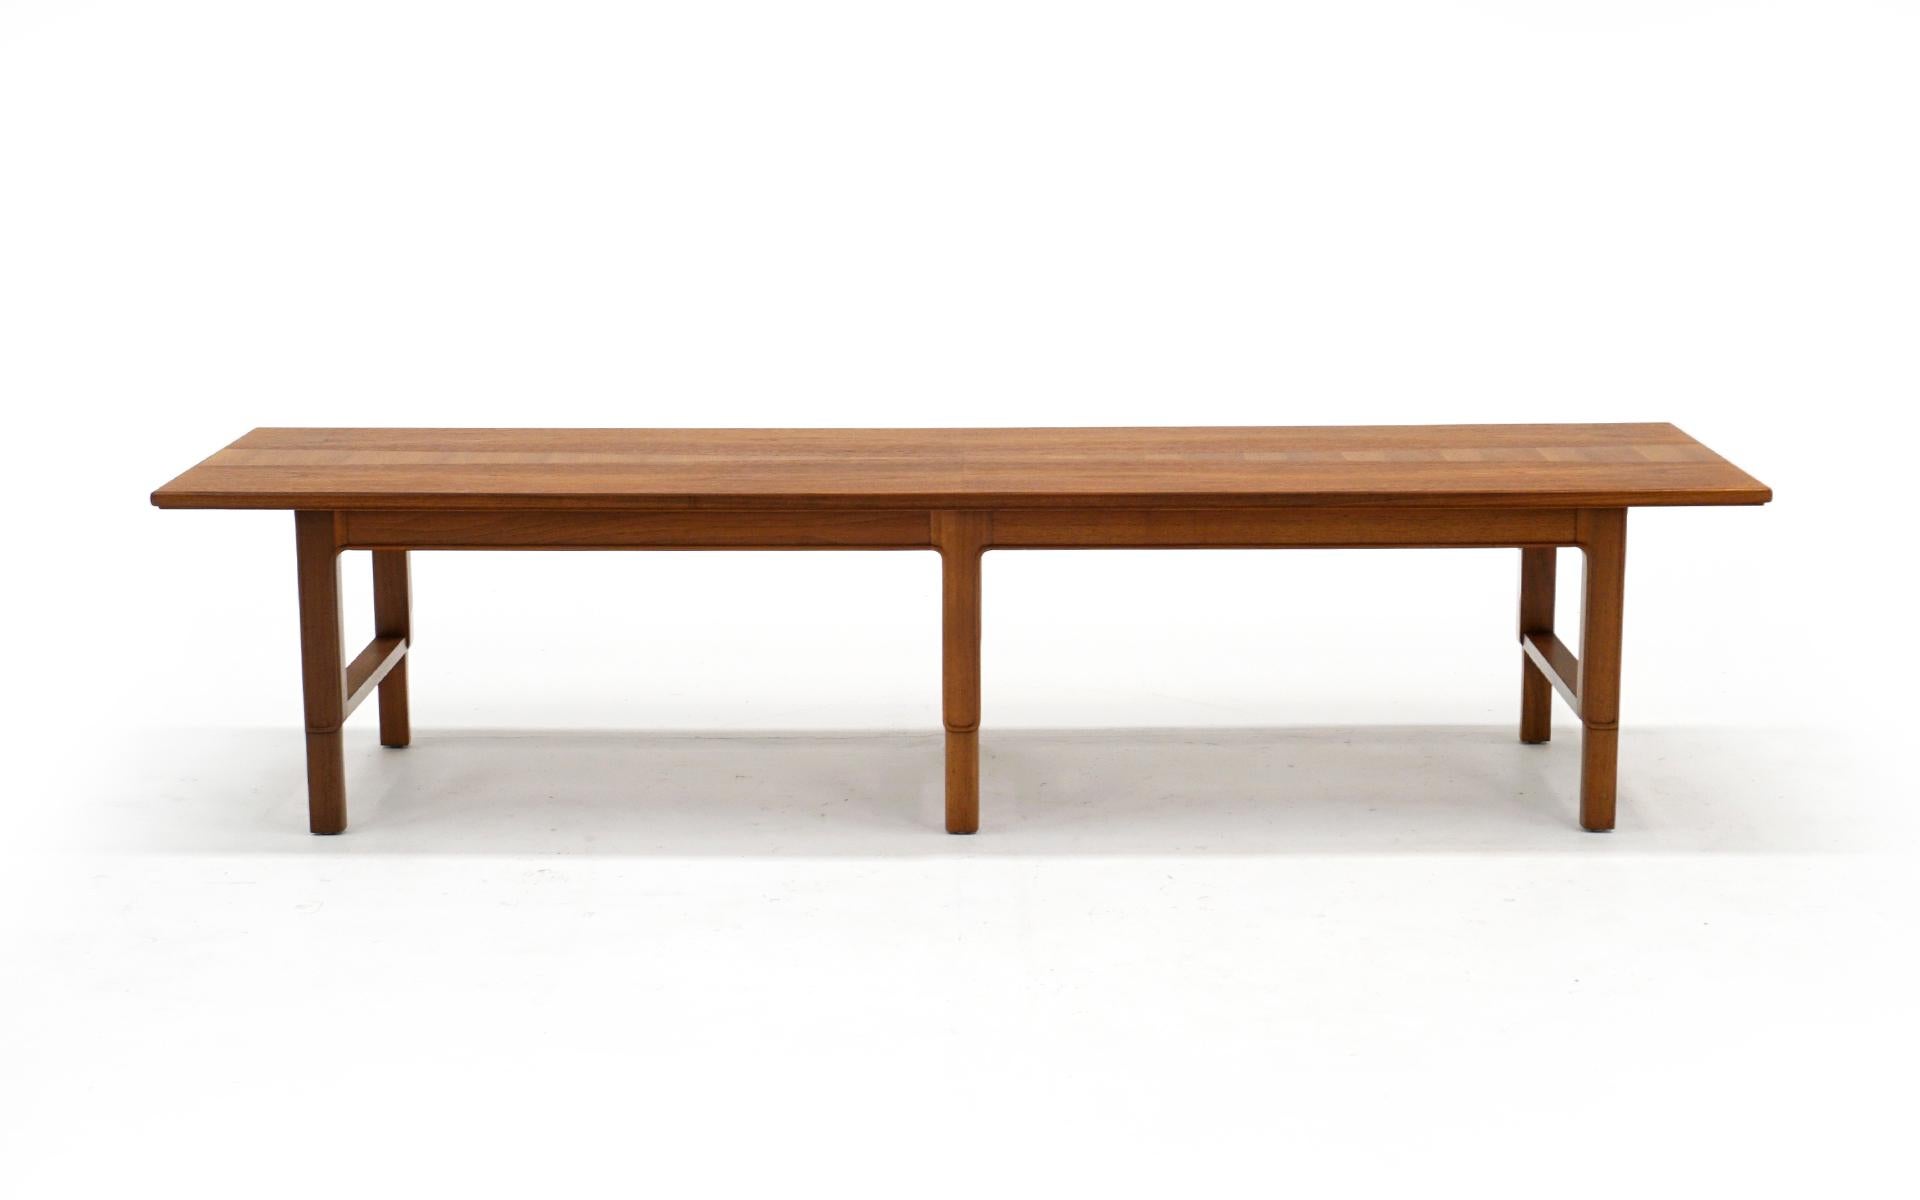 Walnut and teak coffee table or bench designed by Edward Wormley, produced by Dunbar. Expertly refinished. The walnut top is inlayed with a teak veneer design (see photos). We also have the original receipt of purchase. Excellent condition.